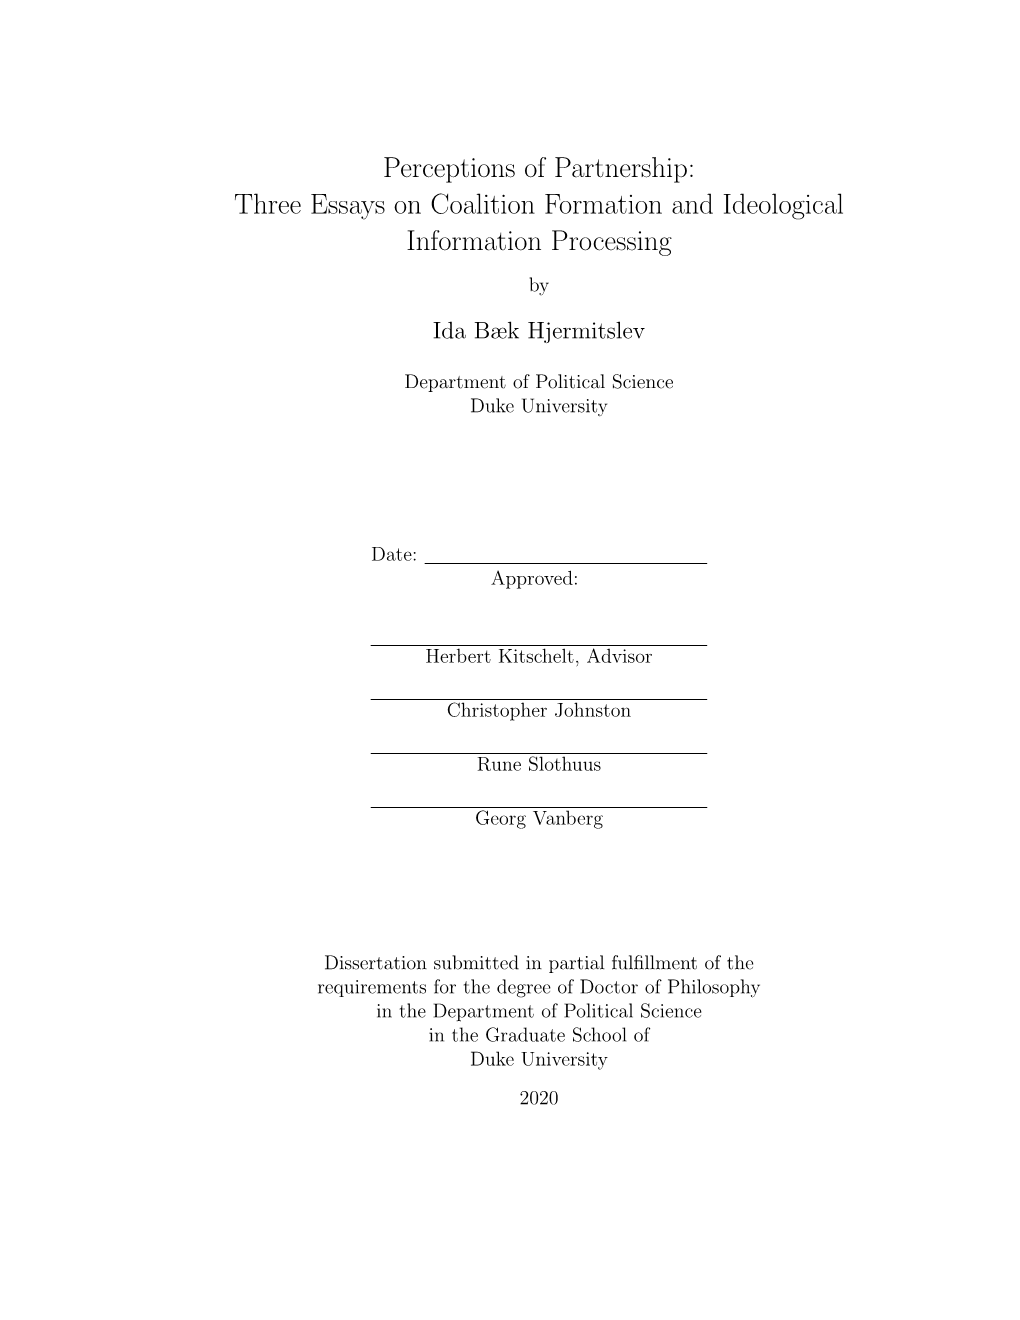 Three Essays on Coalition Formation and Ideological Information Processing By